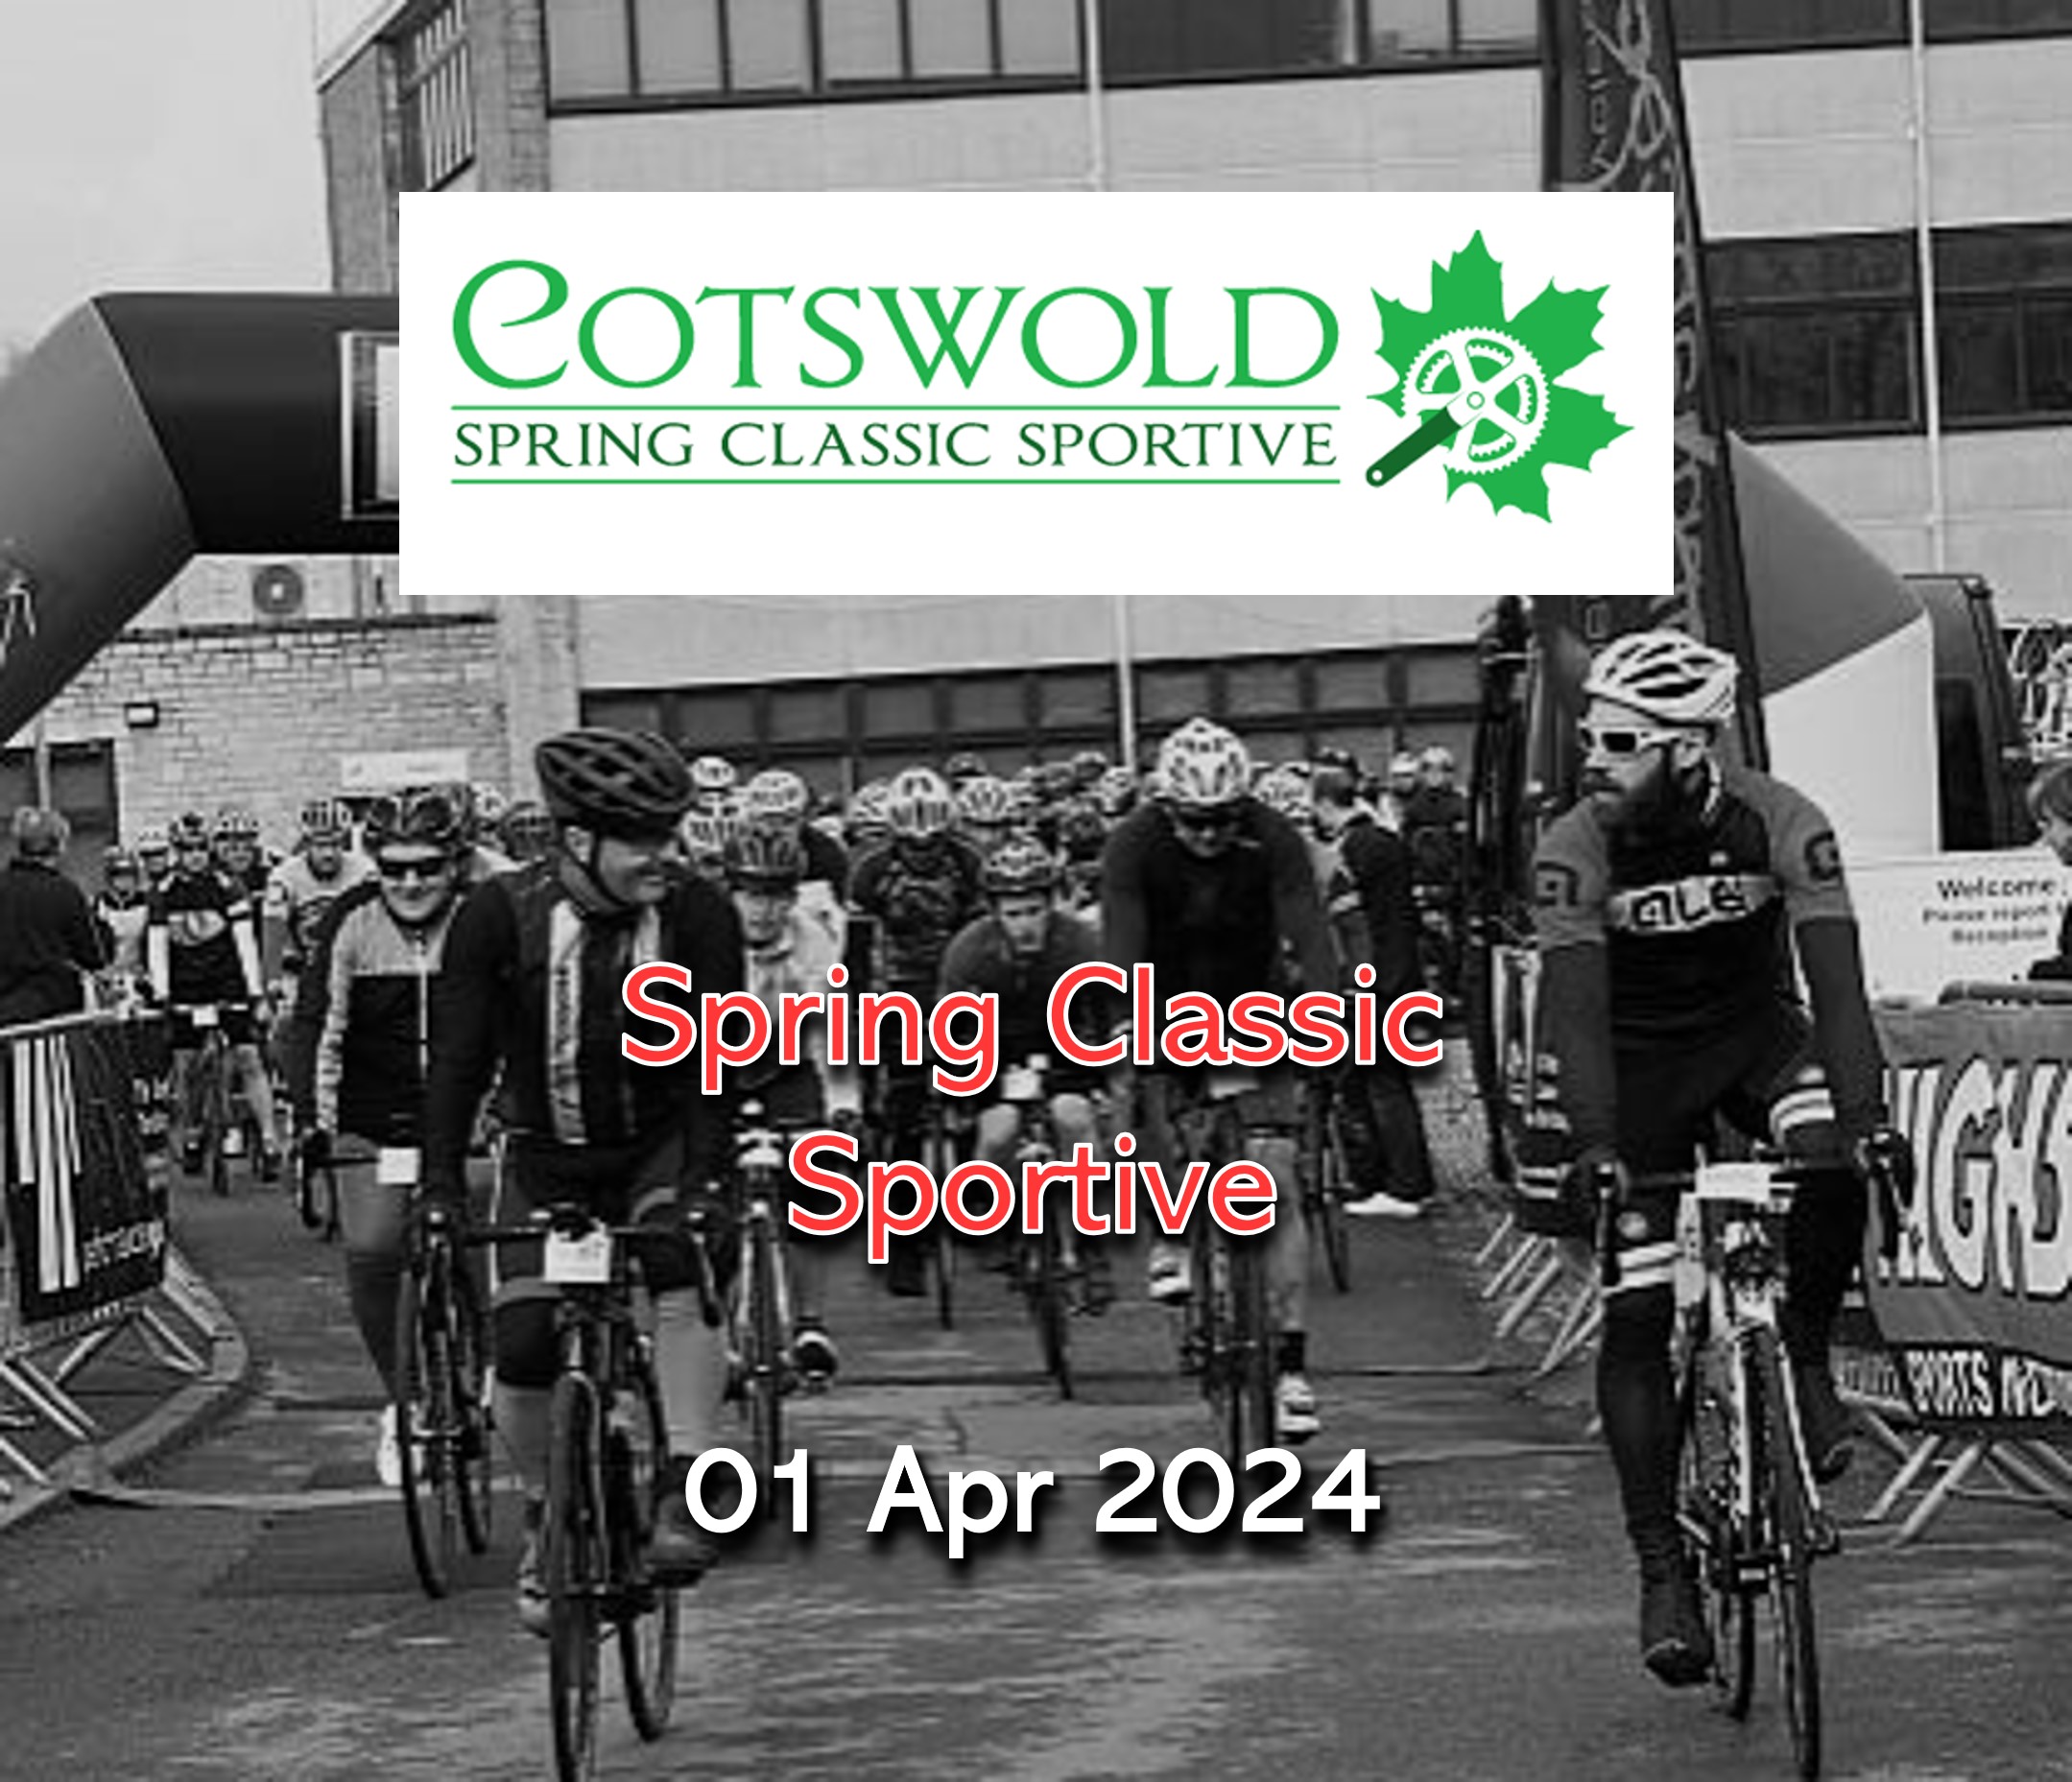 Cotswold Spring Classic Sportive